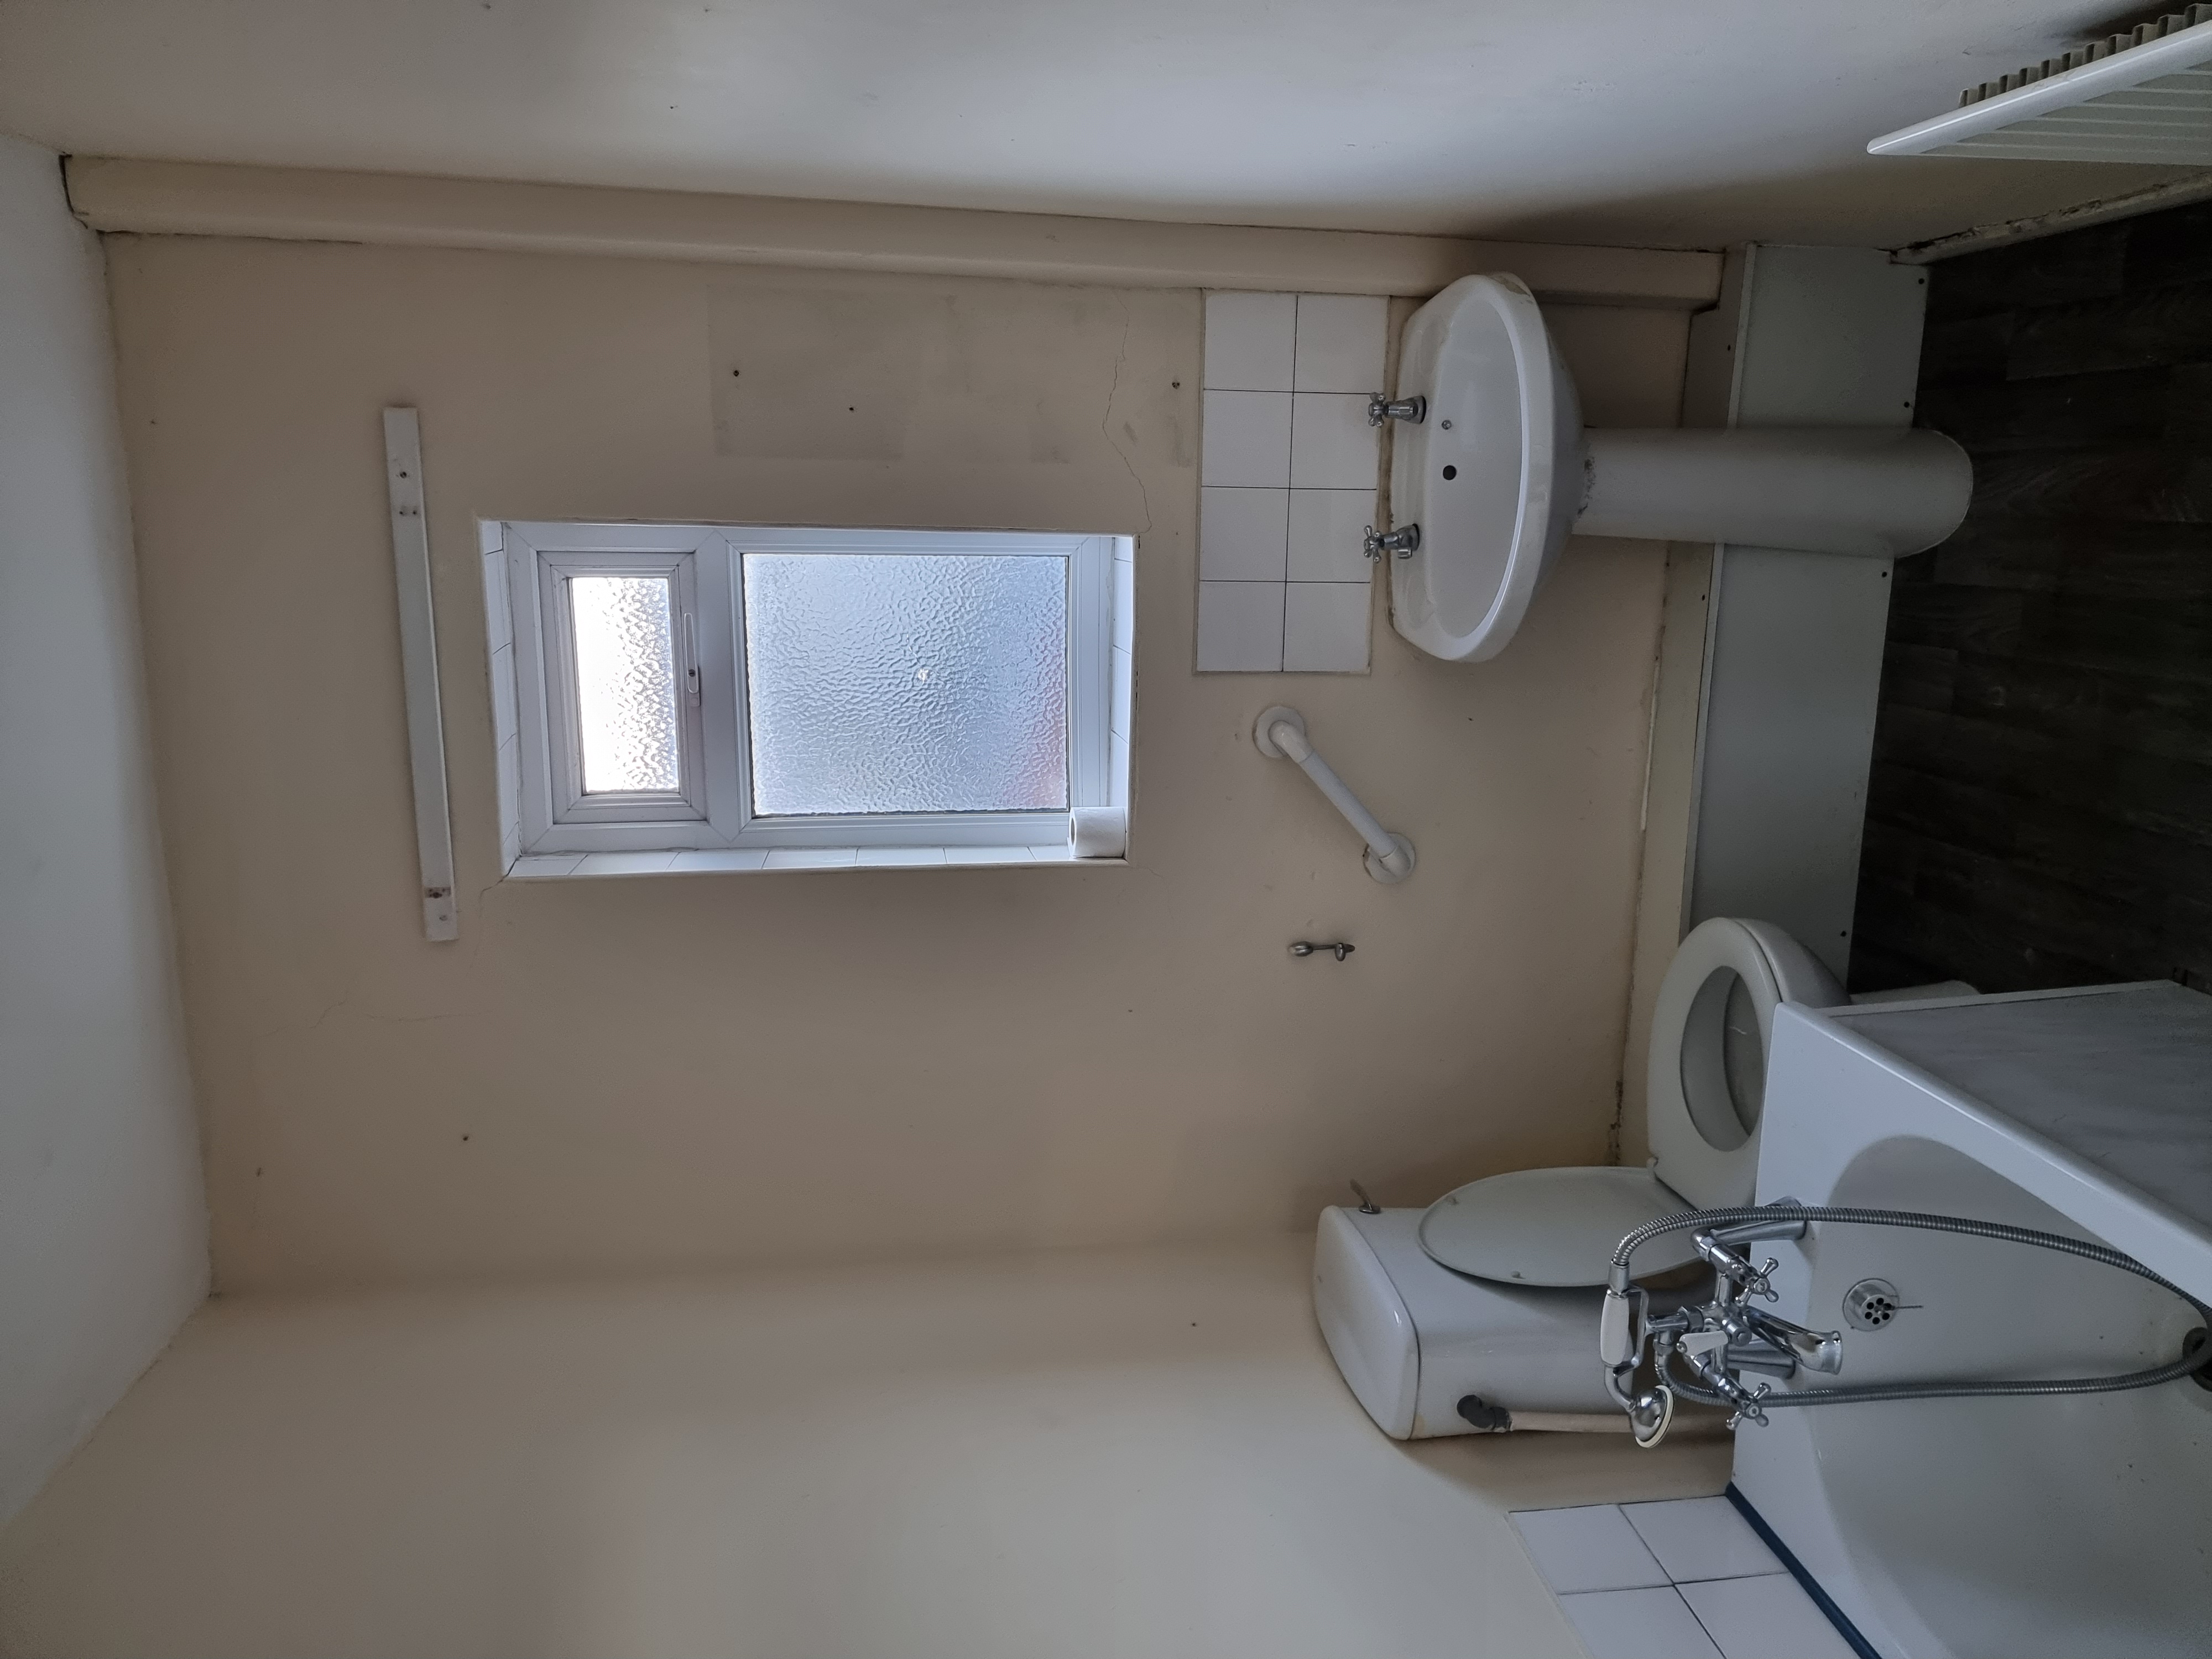 2 Bedroom Terraced to rent in Ferryhill - Mashroom